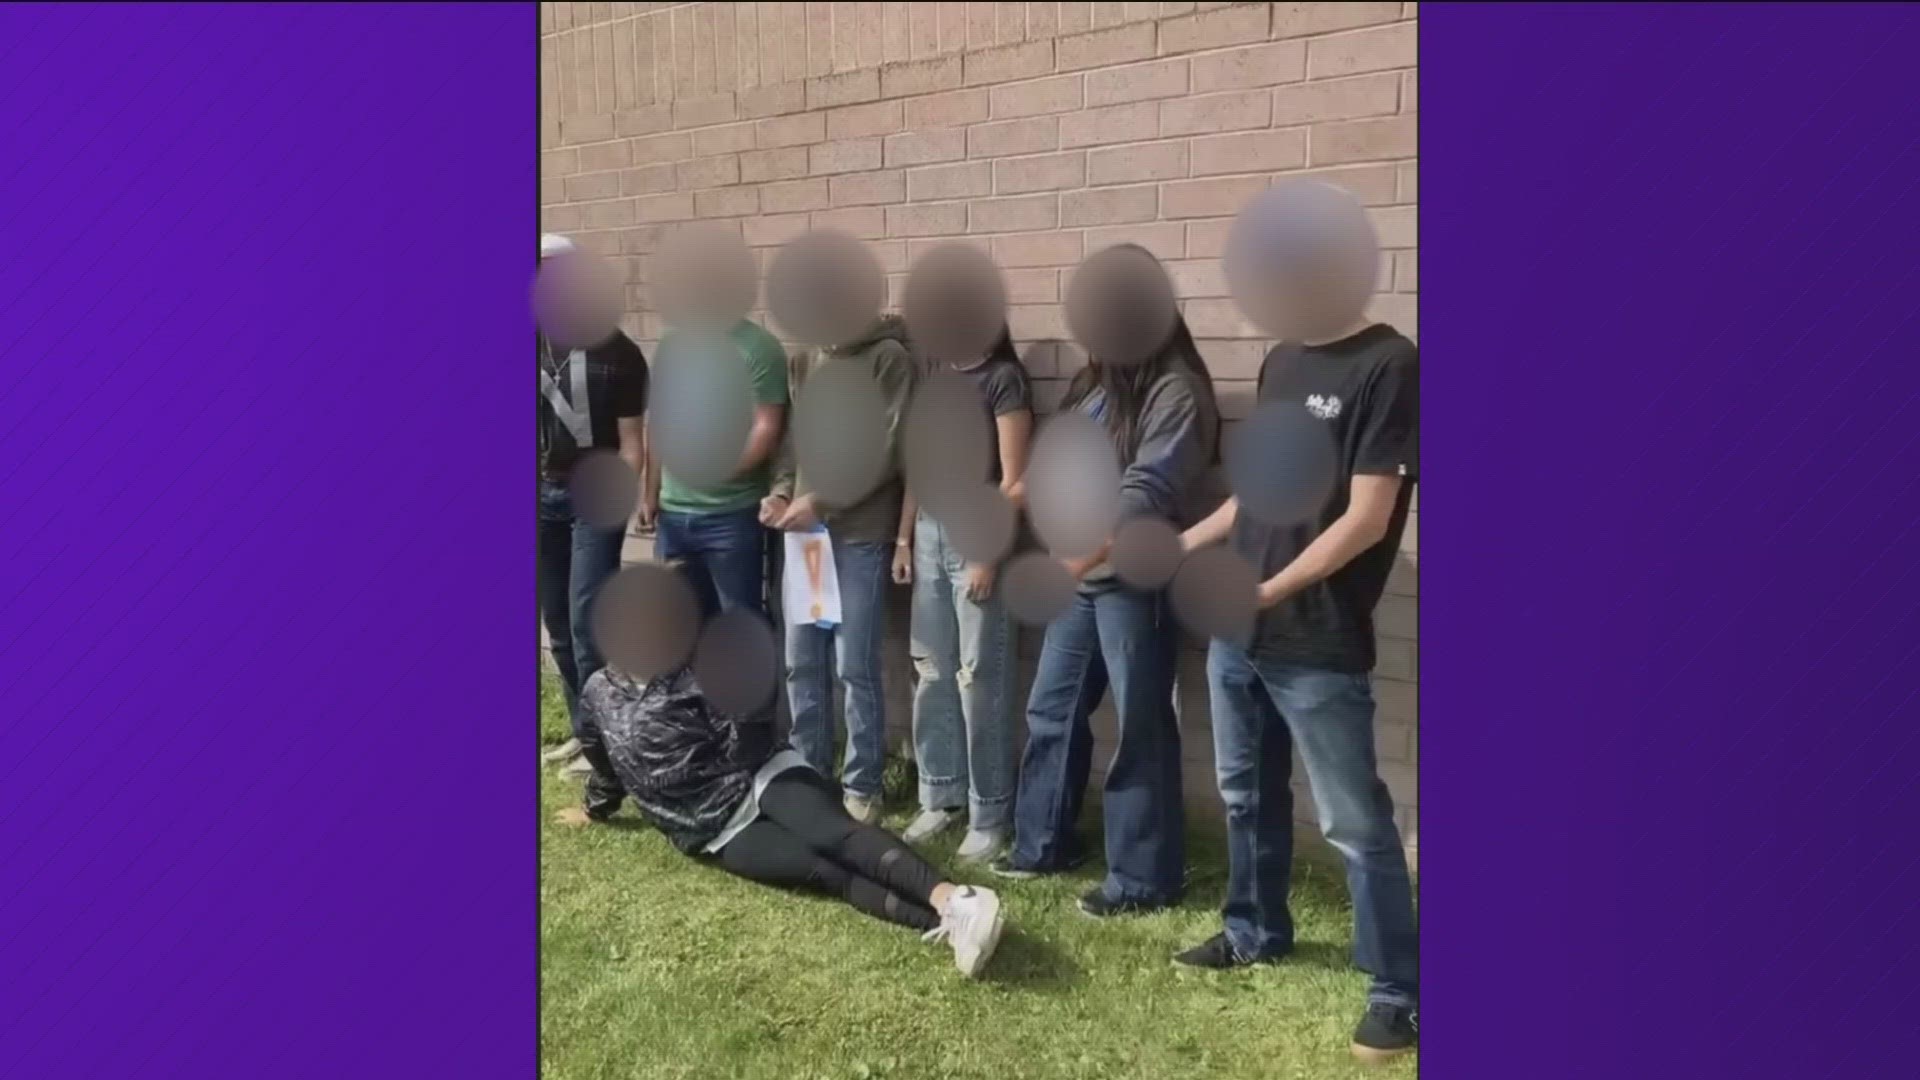 6 students wore letters that spelled out the n-word while surrounding a student and using vulgar hand signs.